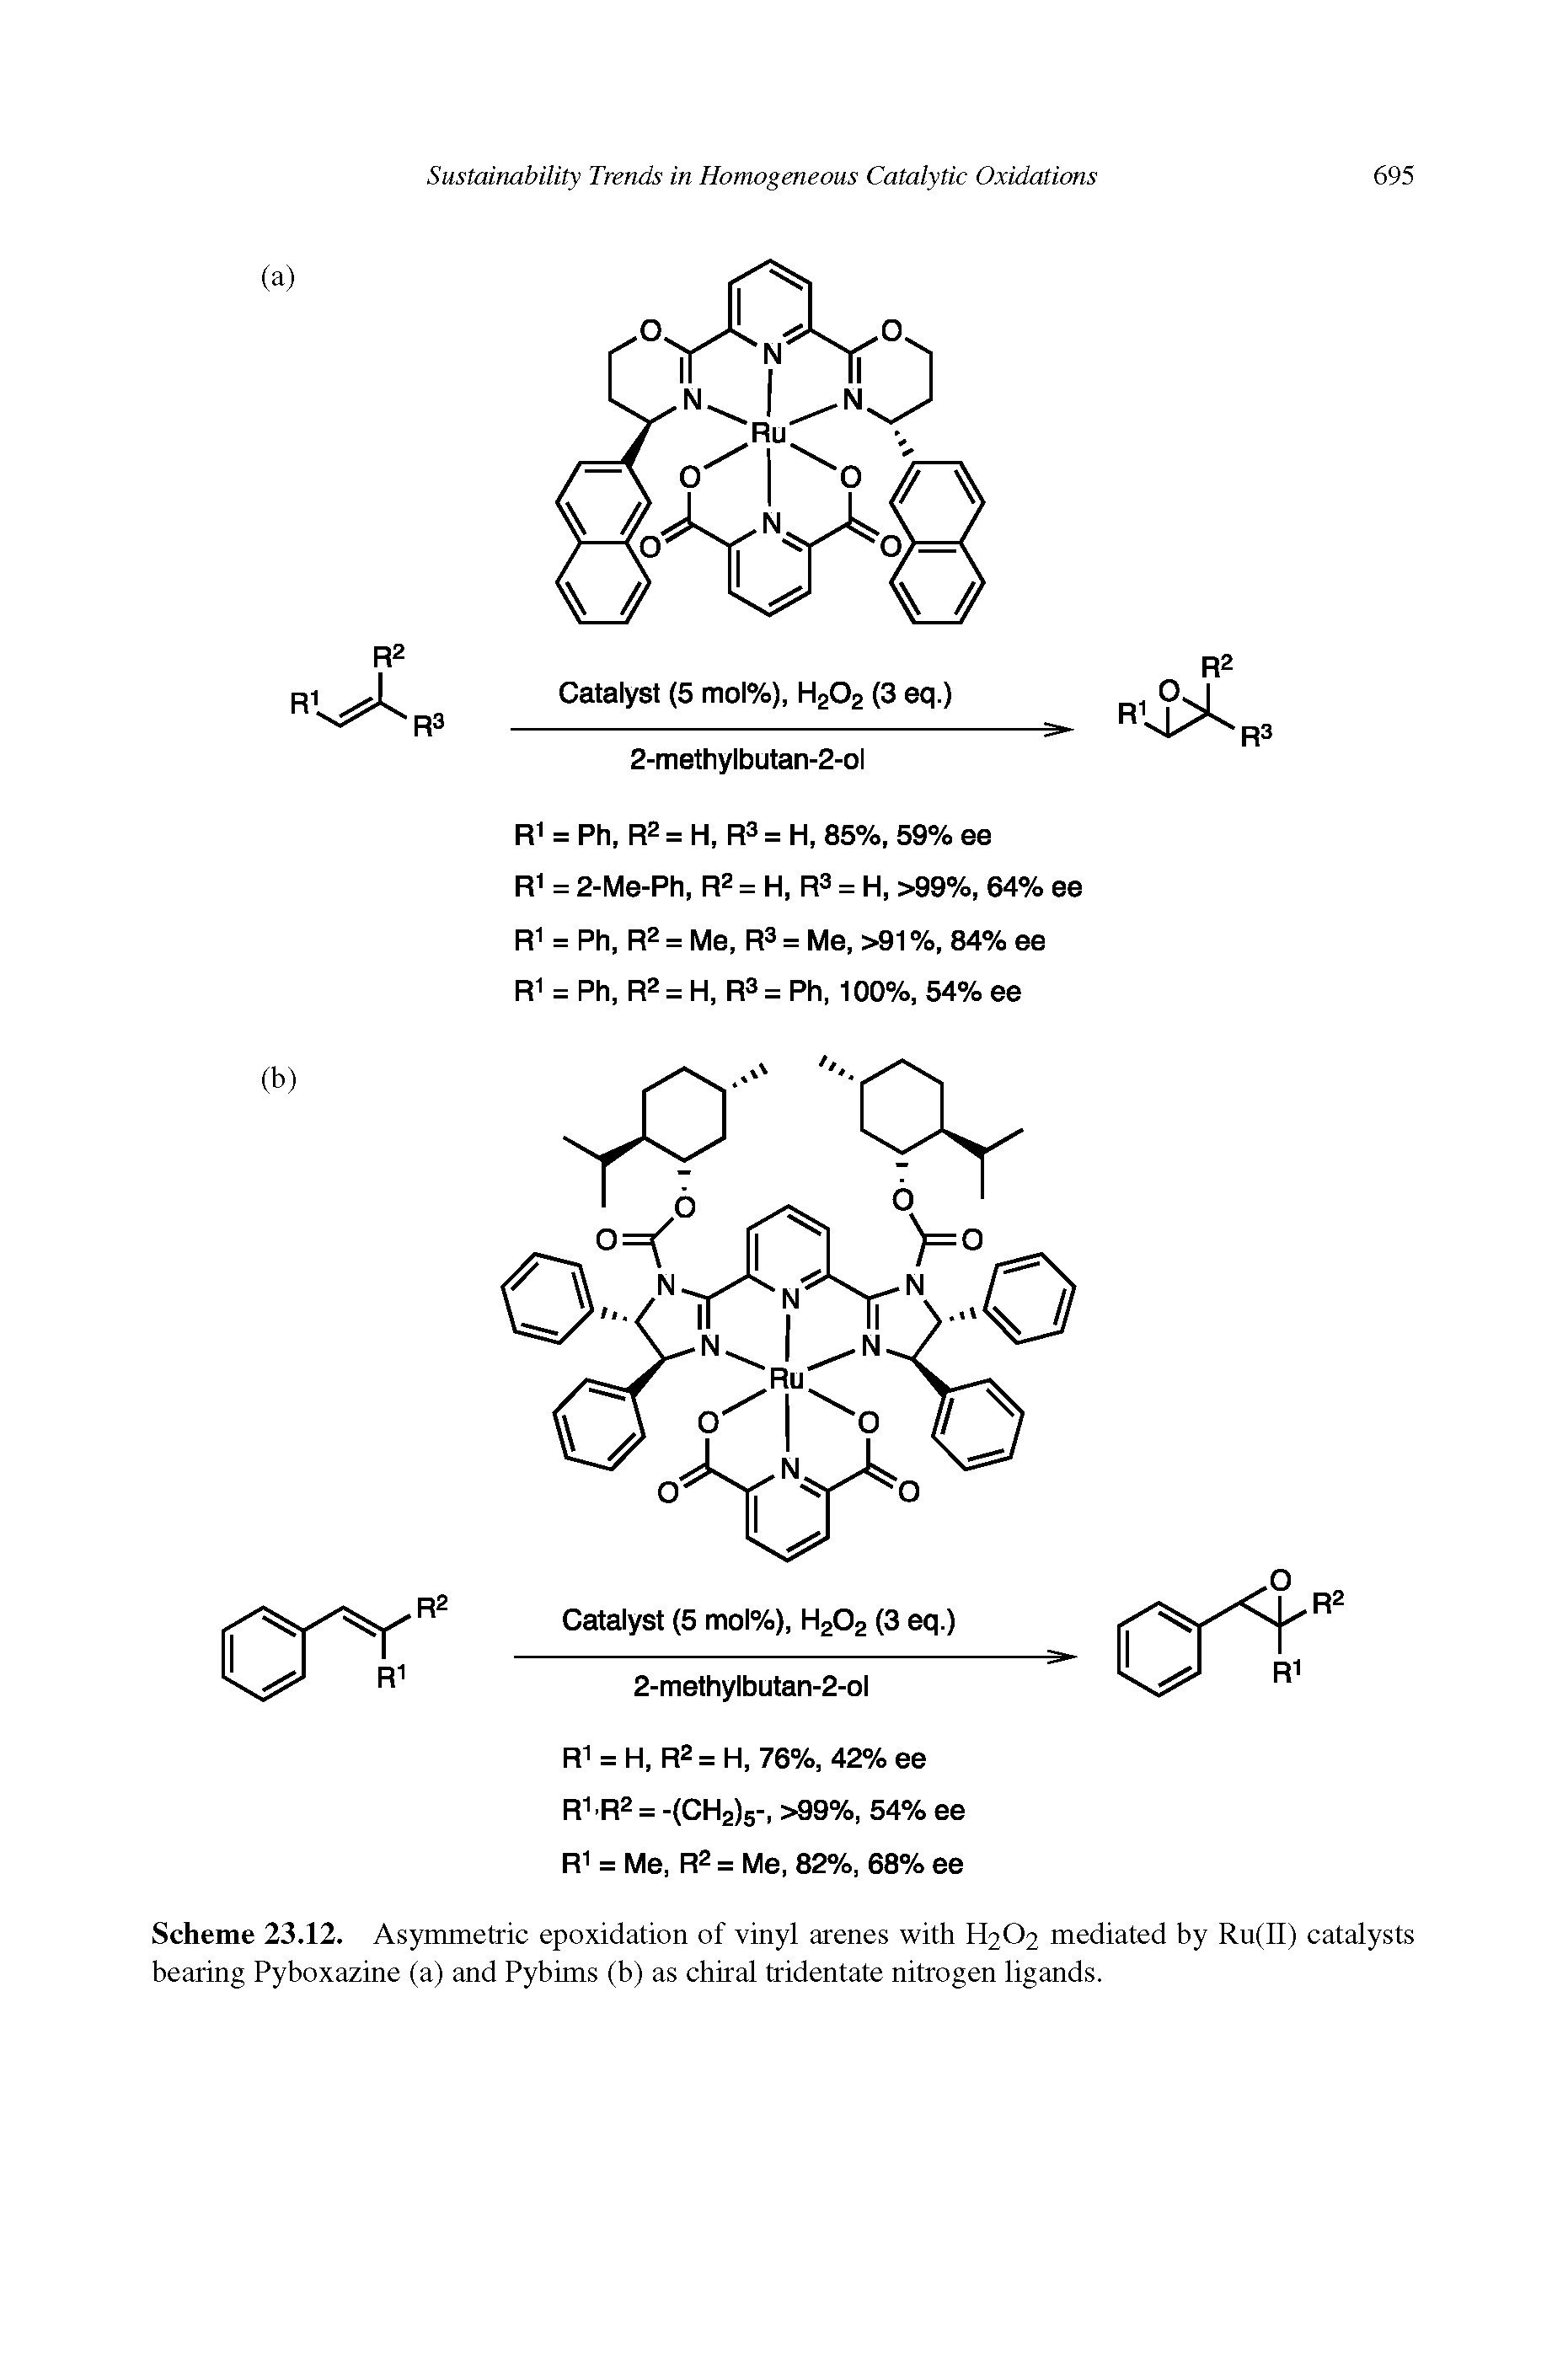 Scheme 23.12. Asymmetric epoxidation of vinyl arenes with H2O2 mediated by Ru(II) catalysts bearing Pyboxazine (a) and Pybims (b) as chiral tridentate nitrogen ligands.